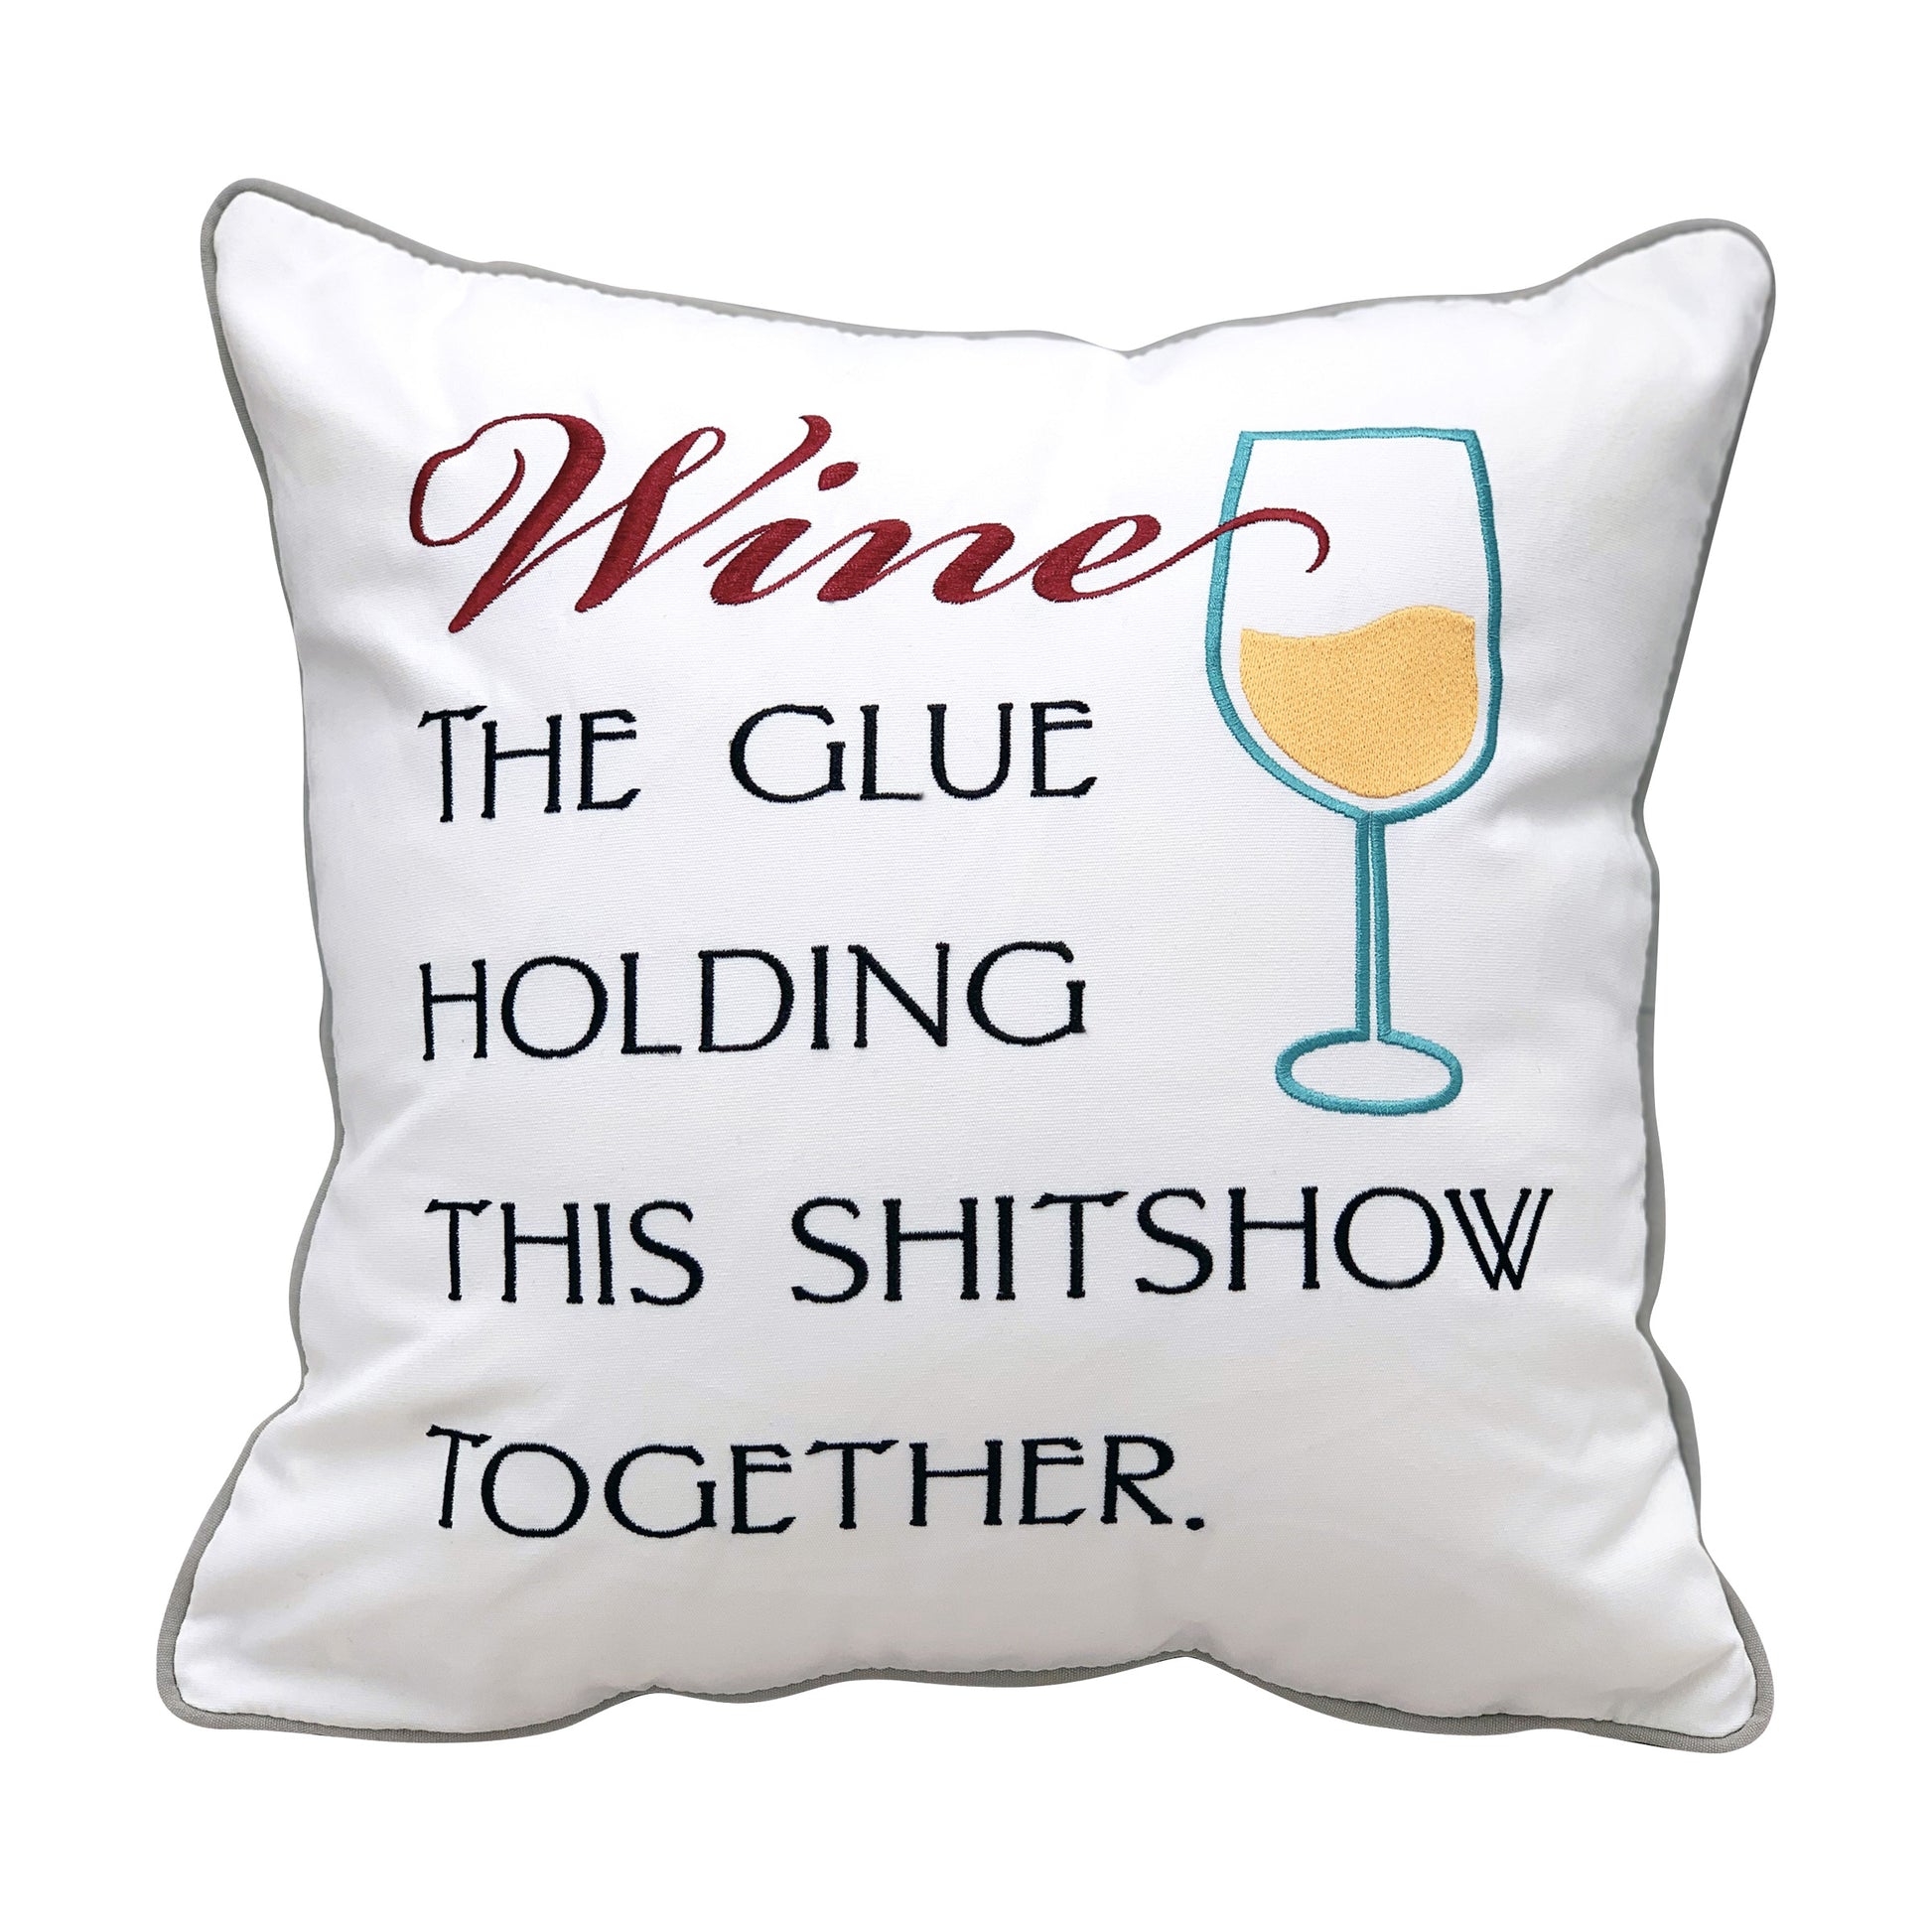 "Wine, the glue holding this shitshow together" sentiment embroidered on a white background.